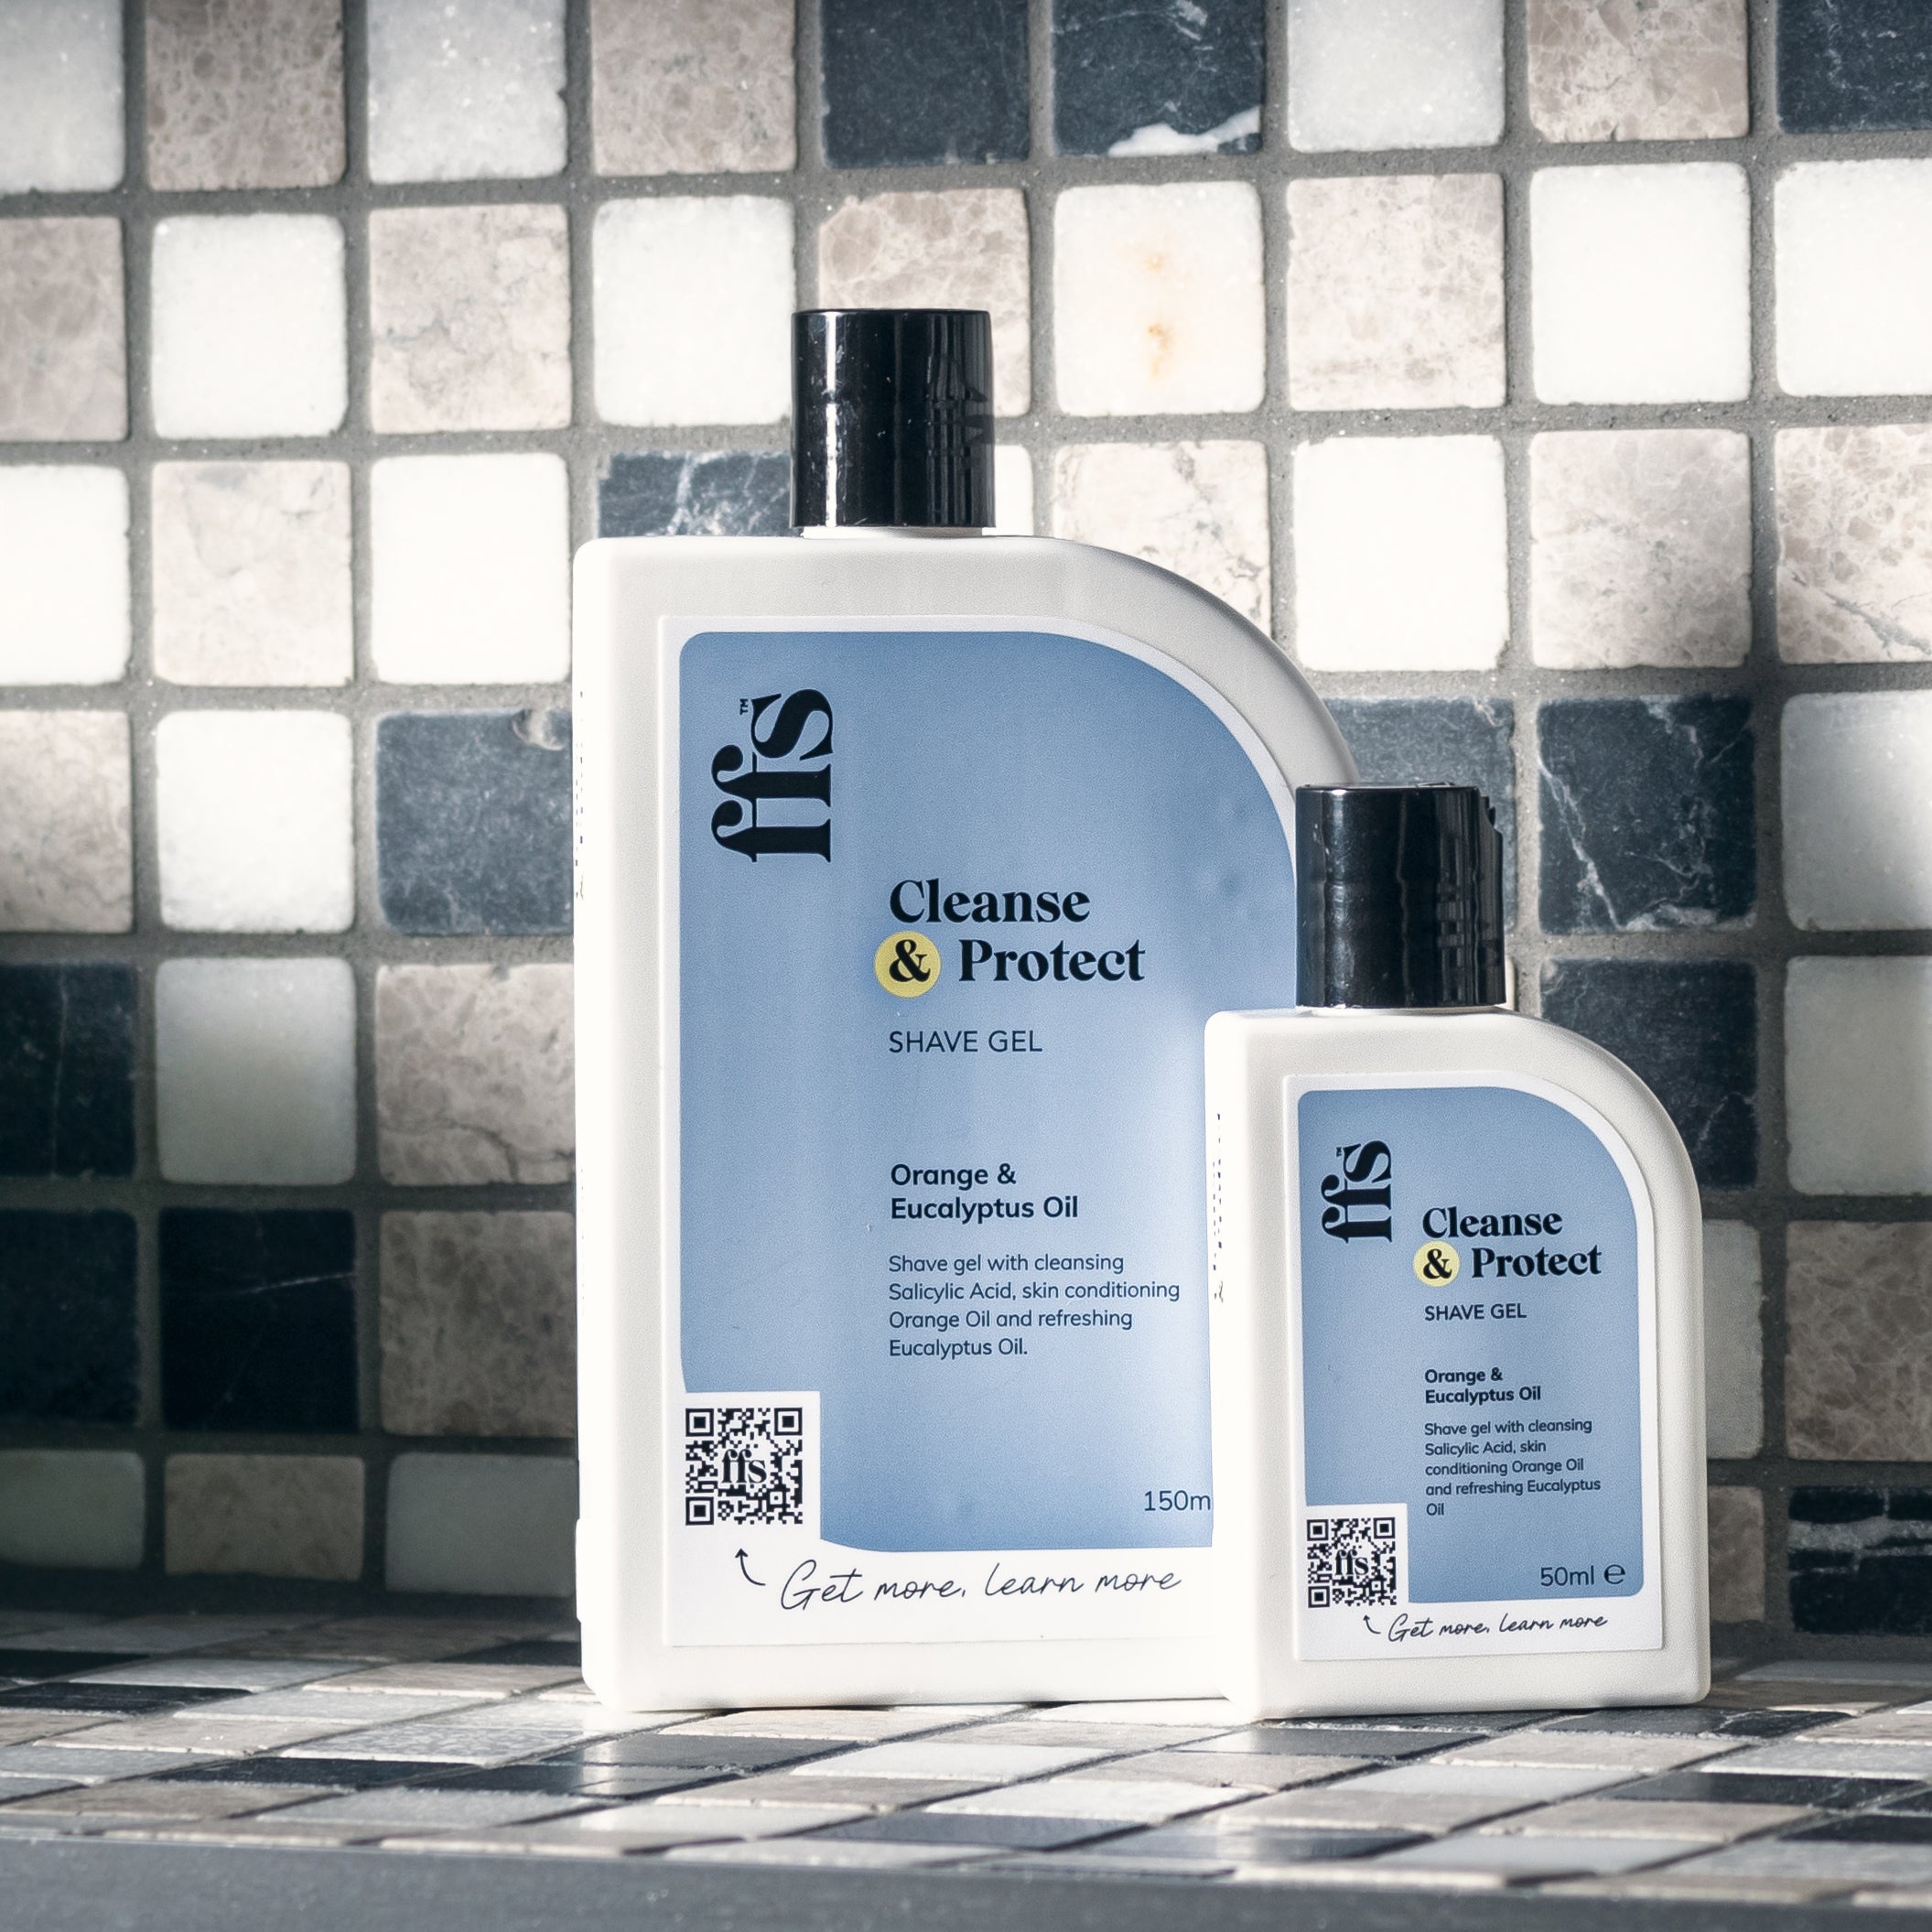 Cleanse & Protect: Shave Gel